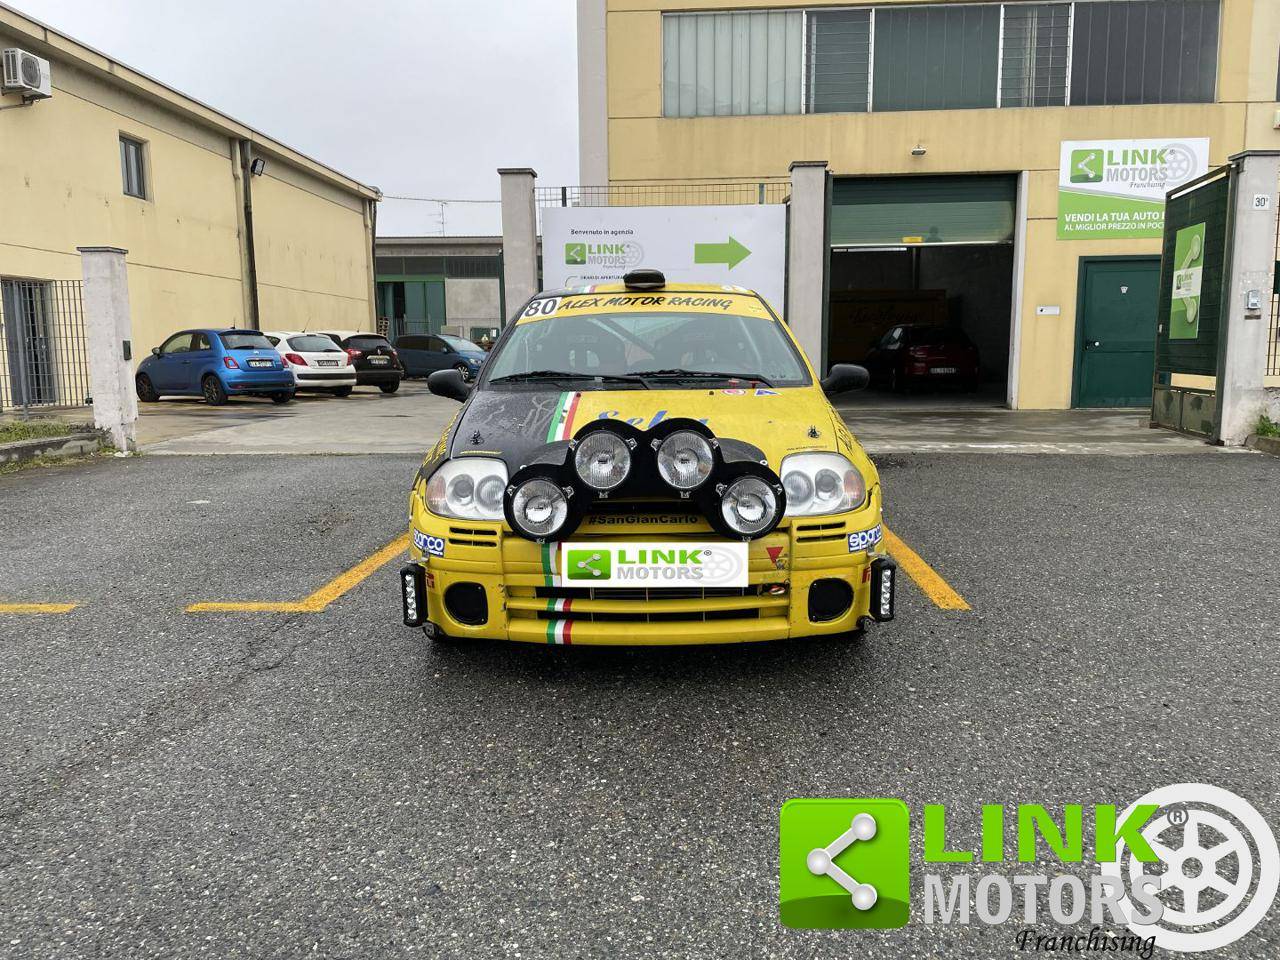 For Sale: Renault Clio II 2.0 16V Sport (2000) offered for €13,000